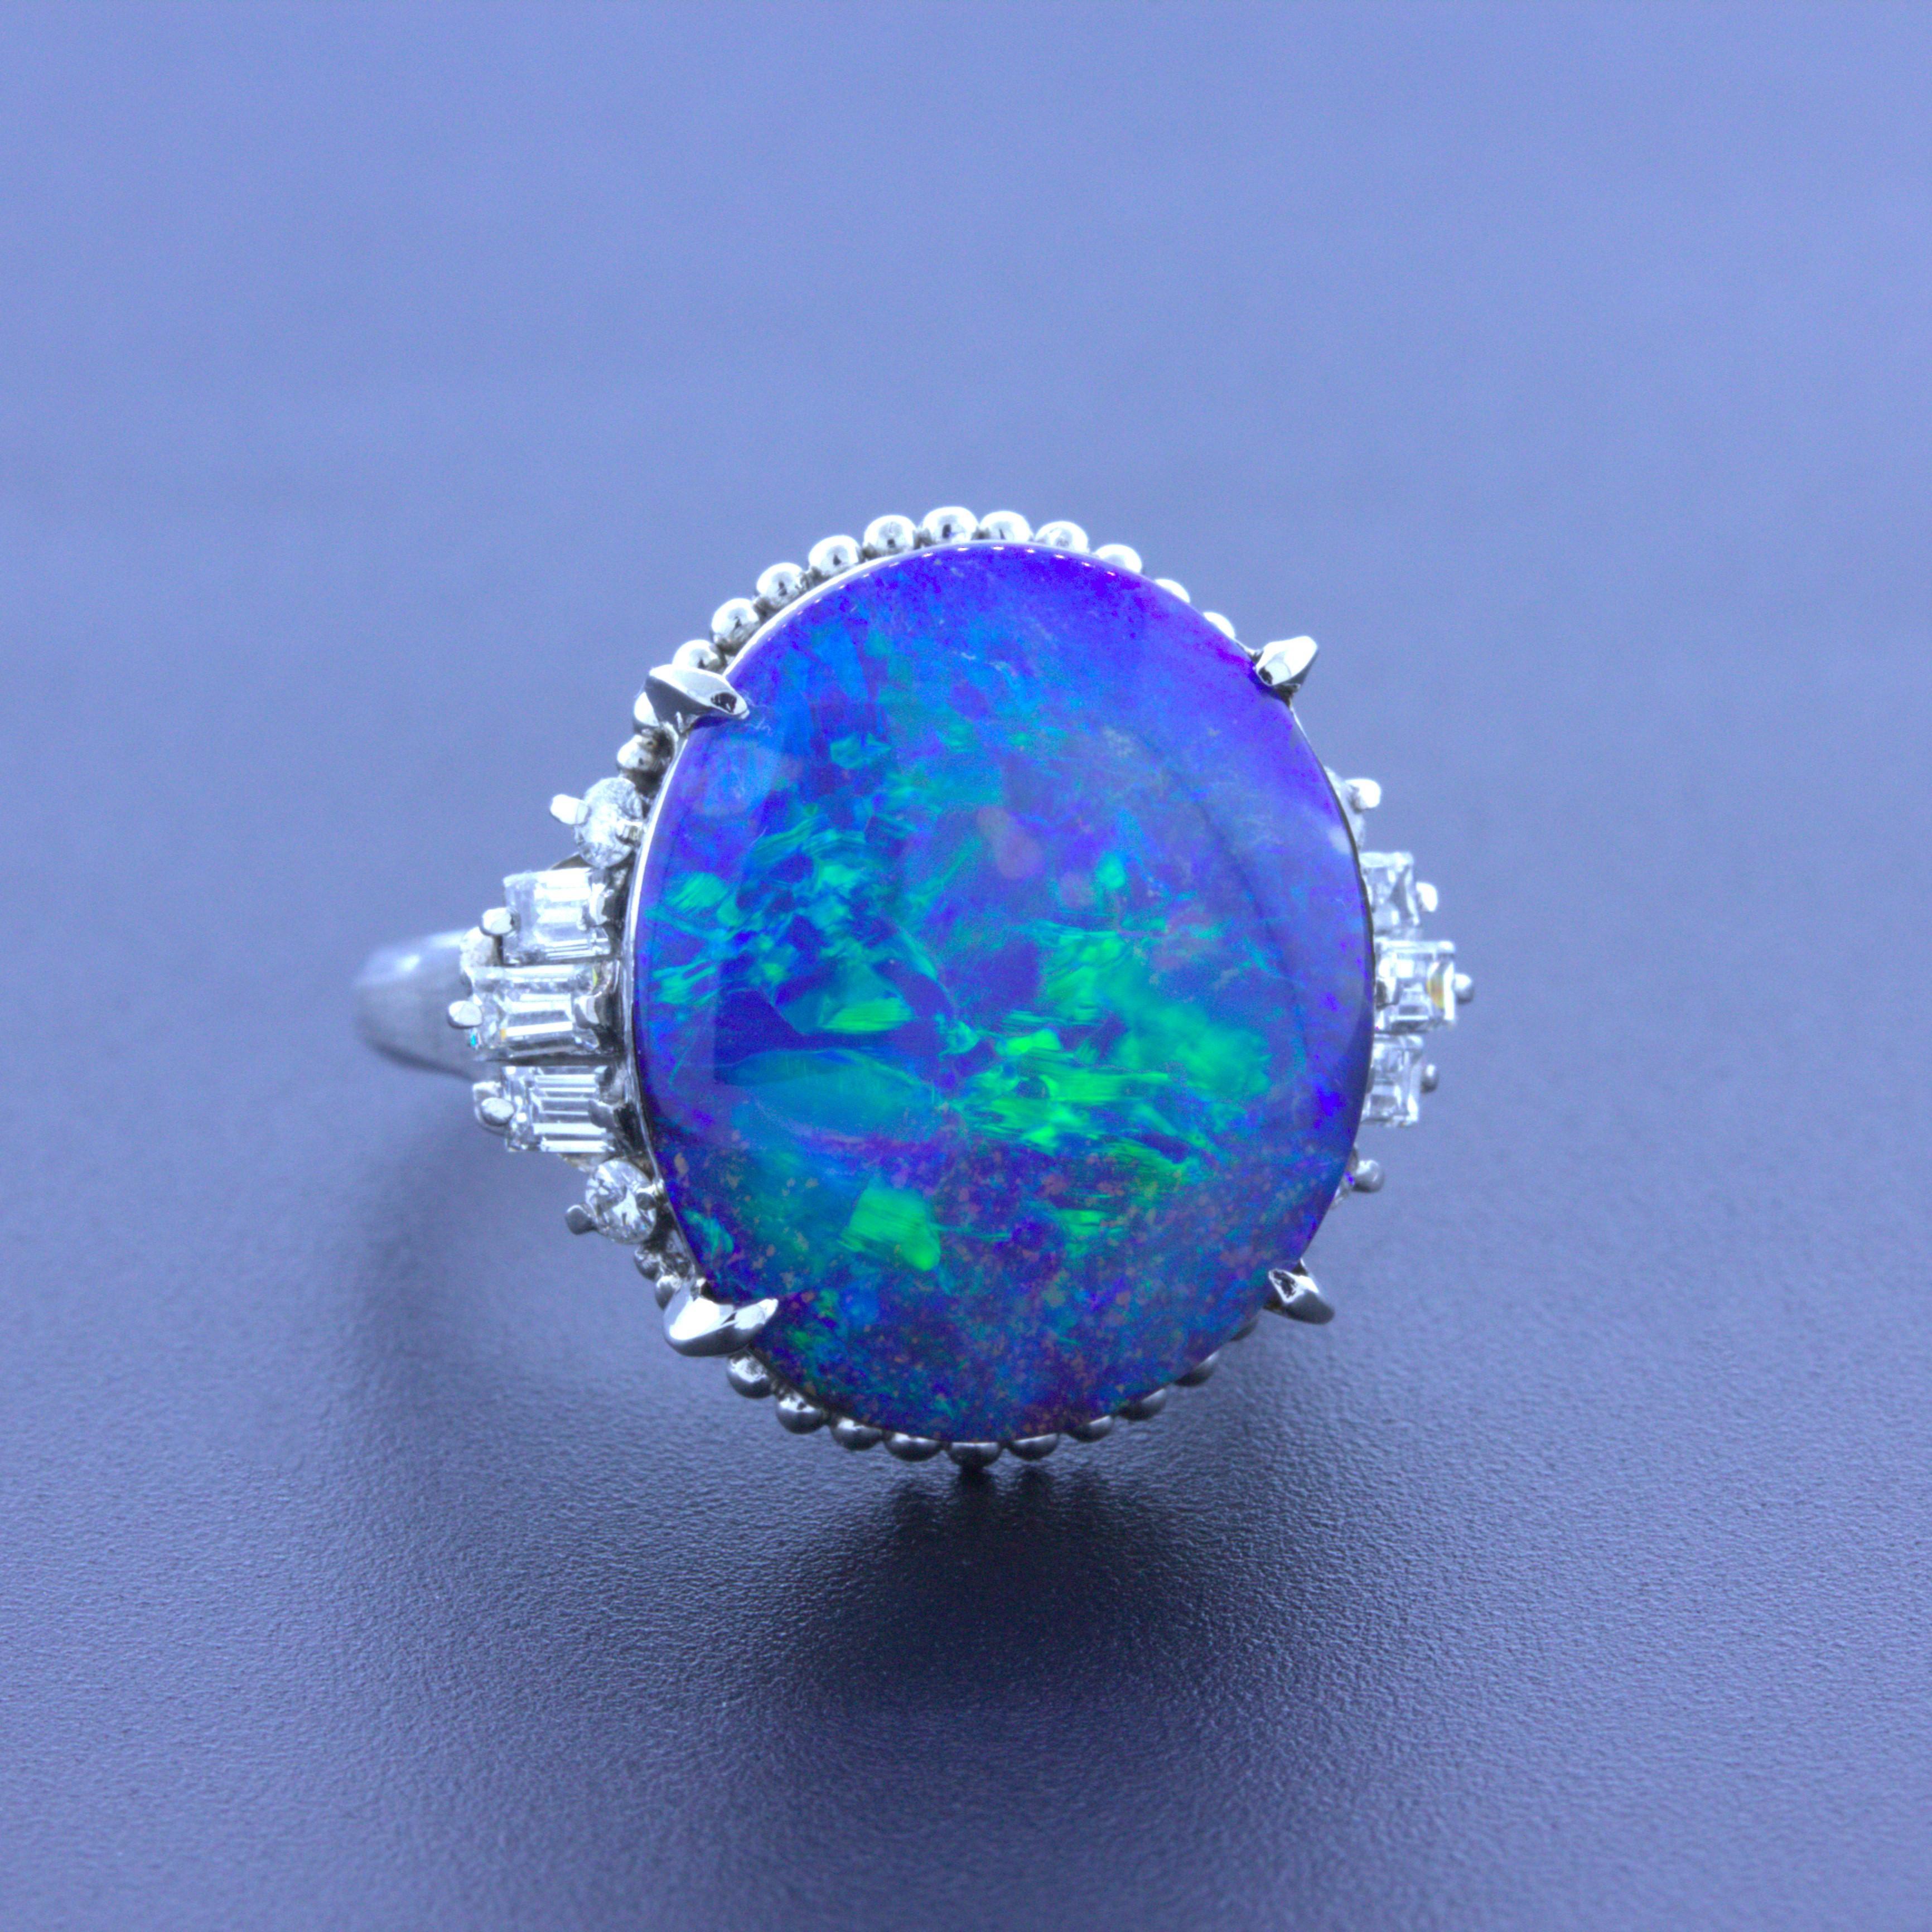 A simple yet classy platinum ring featuring a 9.47 carat Australian boulder opal. The opal has great play-of-color as flashes of blue, green and turquoise can be seen across the stone. The ring is complemented by 0.50 carats of baguette and round